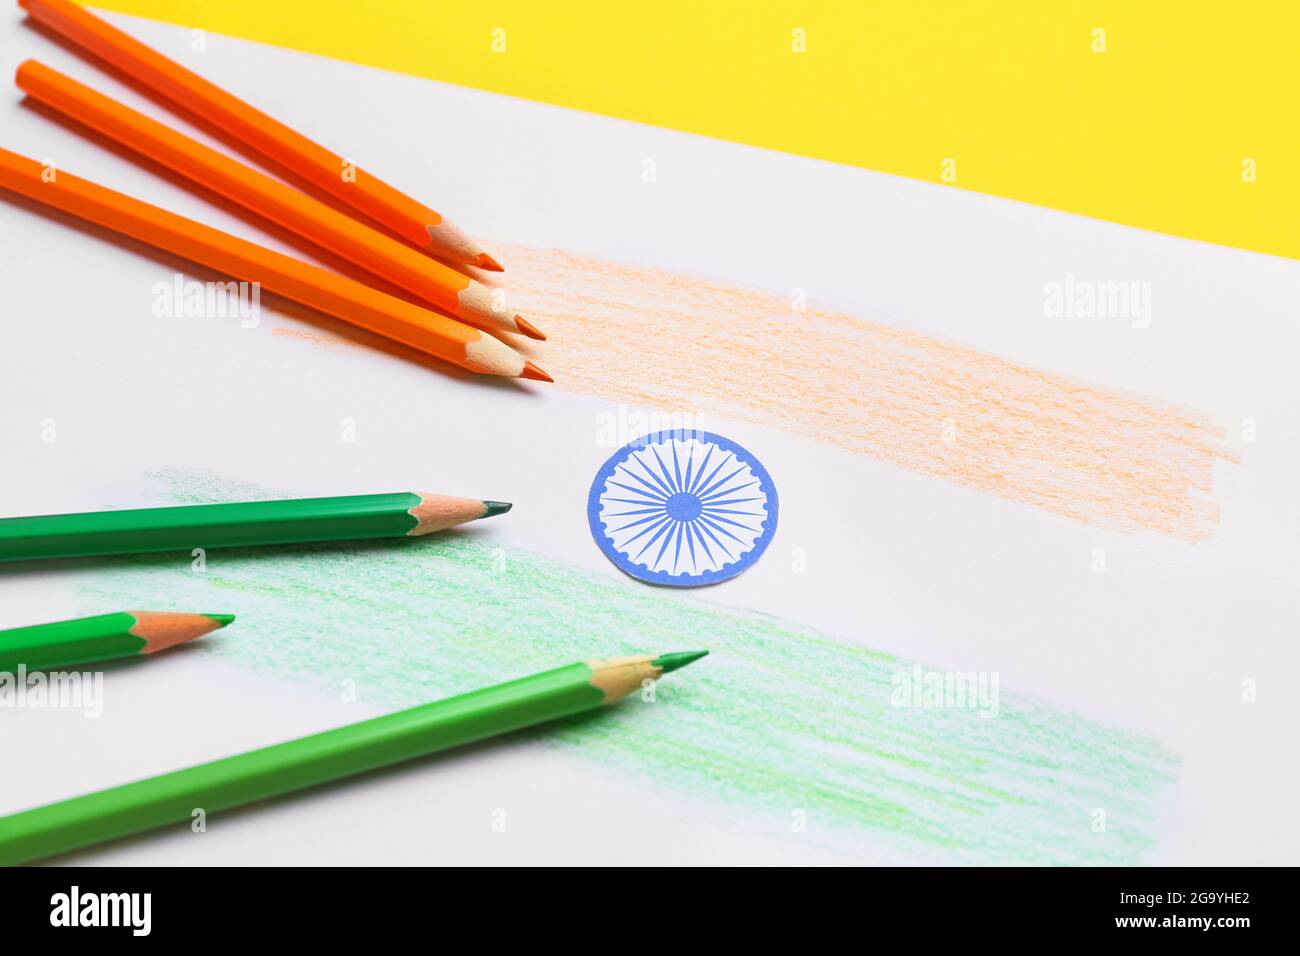 Indian Flag Drawing | Flag Drawing | 15 August Drawing - YouTube